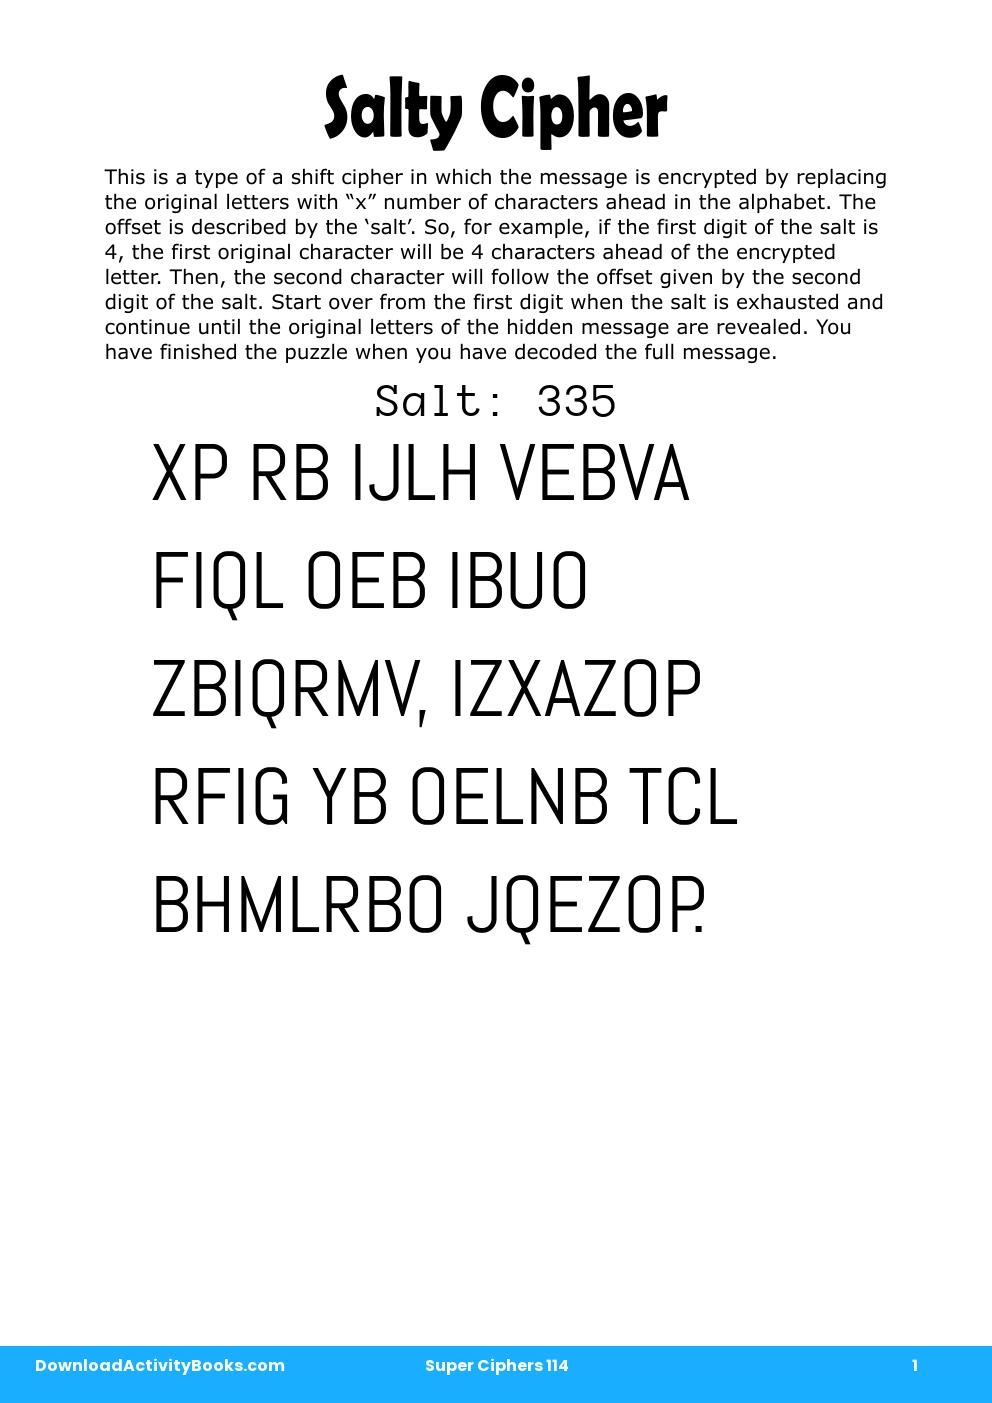 Salty Cipher in Super Ciphers 114